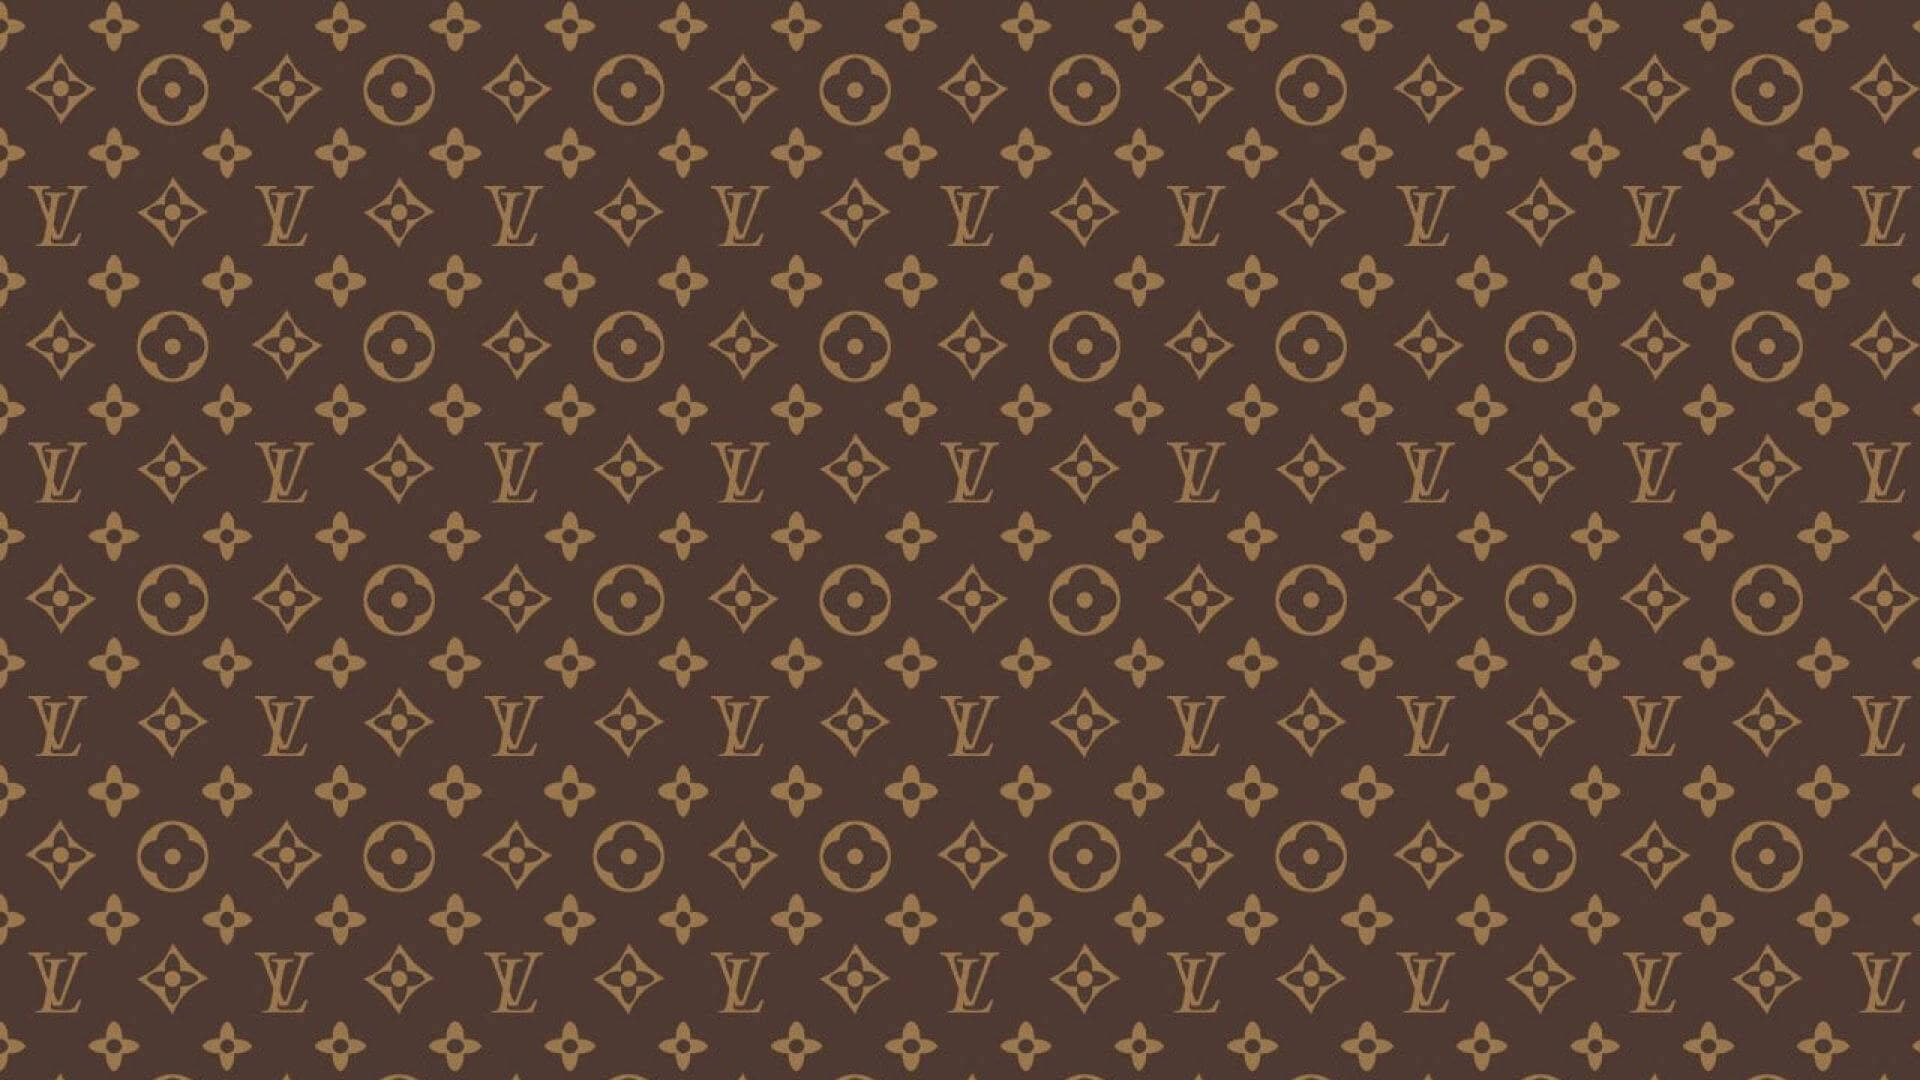 Step out in style with Louis Vuitton Wallpaper